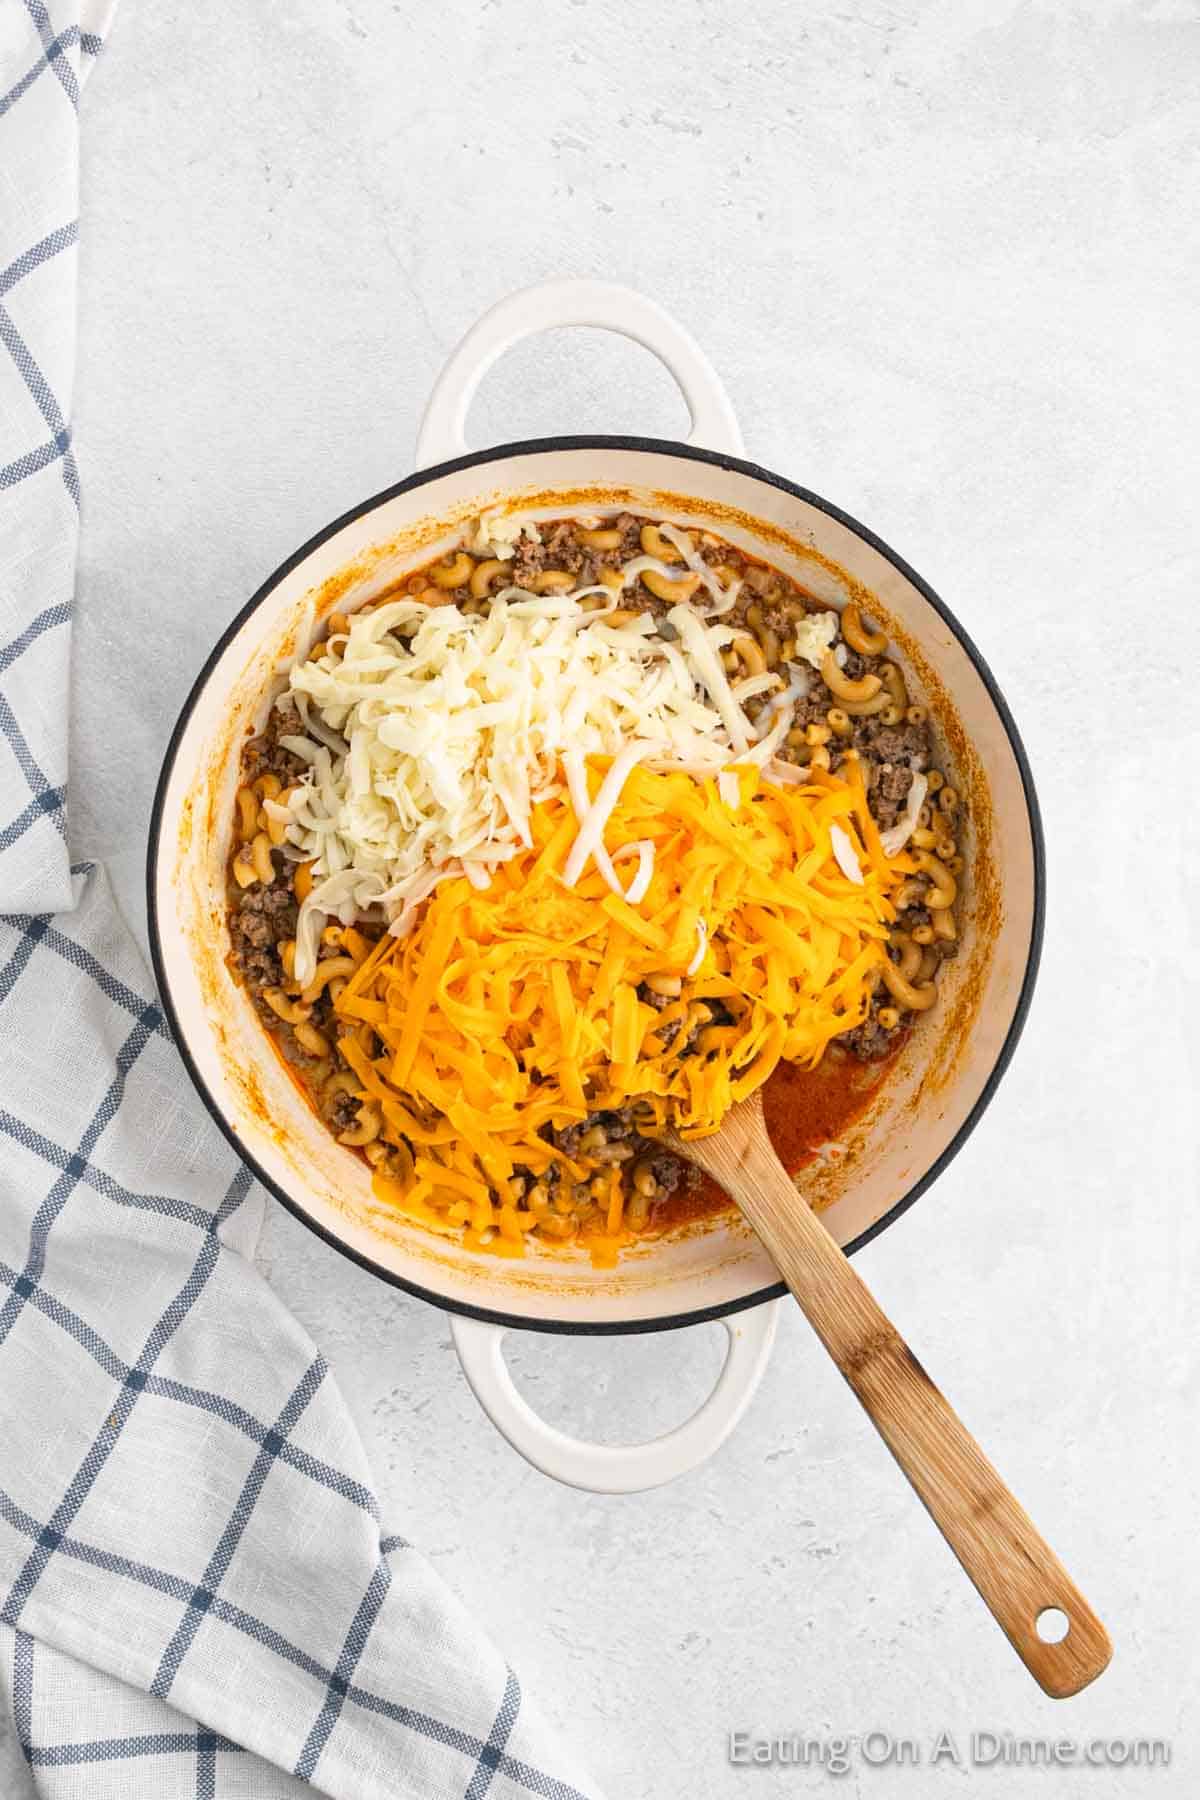 A white pot sits on a white and blue checkered cloth. Inside the pot, there is a mixture of cooked pasta, ground meat, and shredded cheese, with orange and white cheese on top. A wooden spoon rests in the pot, ready to stir this delicious Homemade Cheeseburger Helper together.